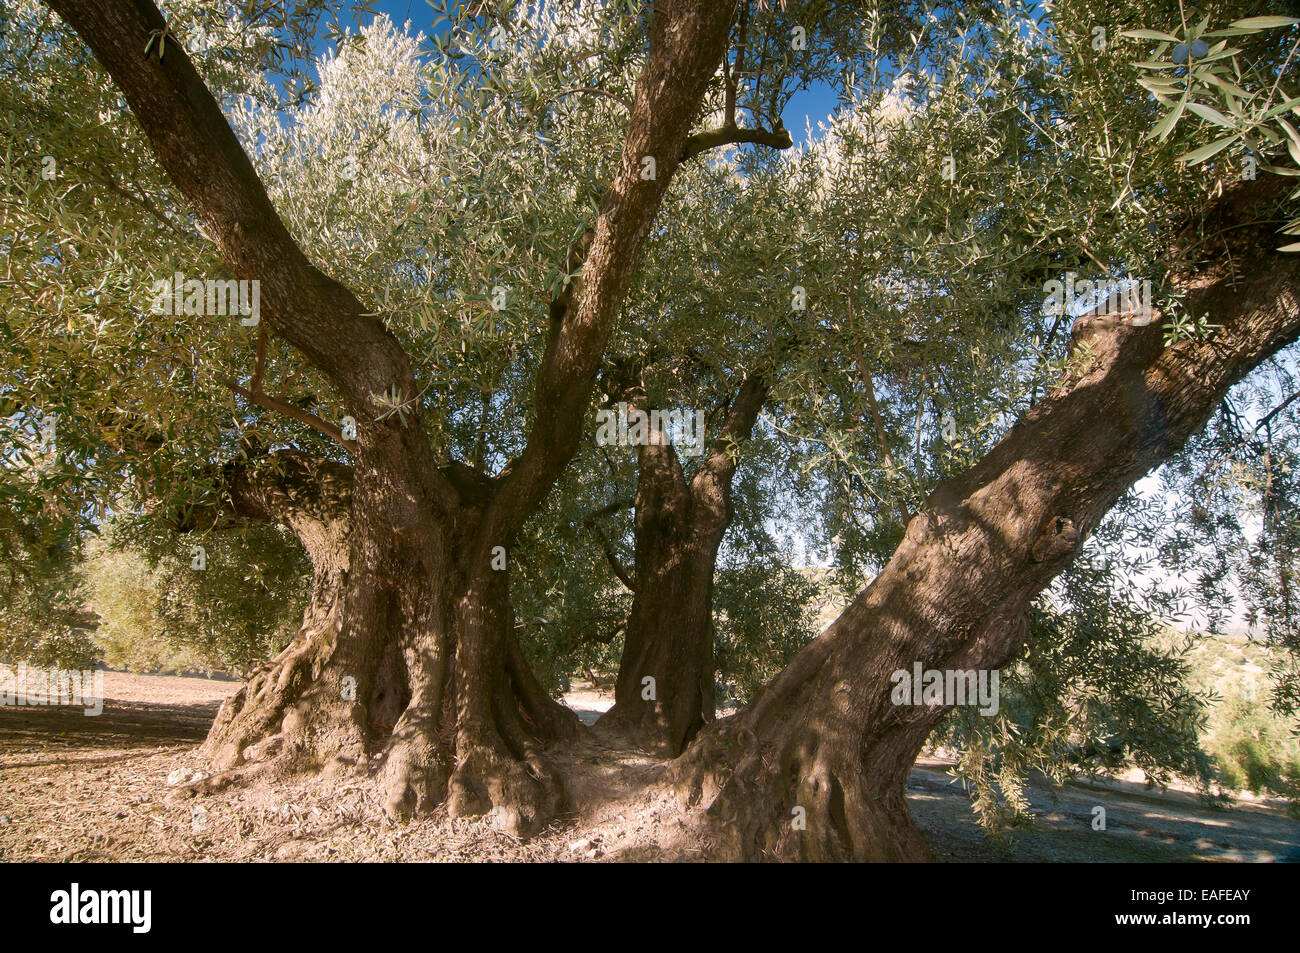 The Estaca Grande -300 year old olive tree, Martos, Jaen province, Region of Andalusia, Spain, Europe Stock Photo